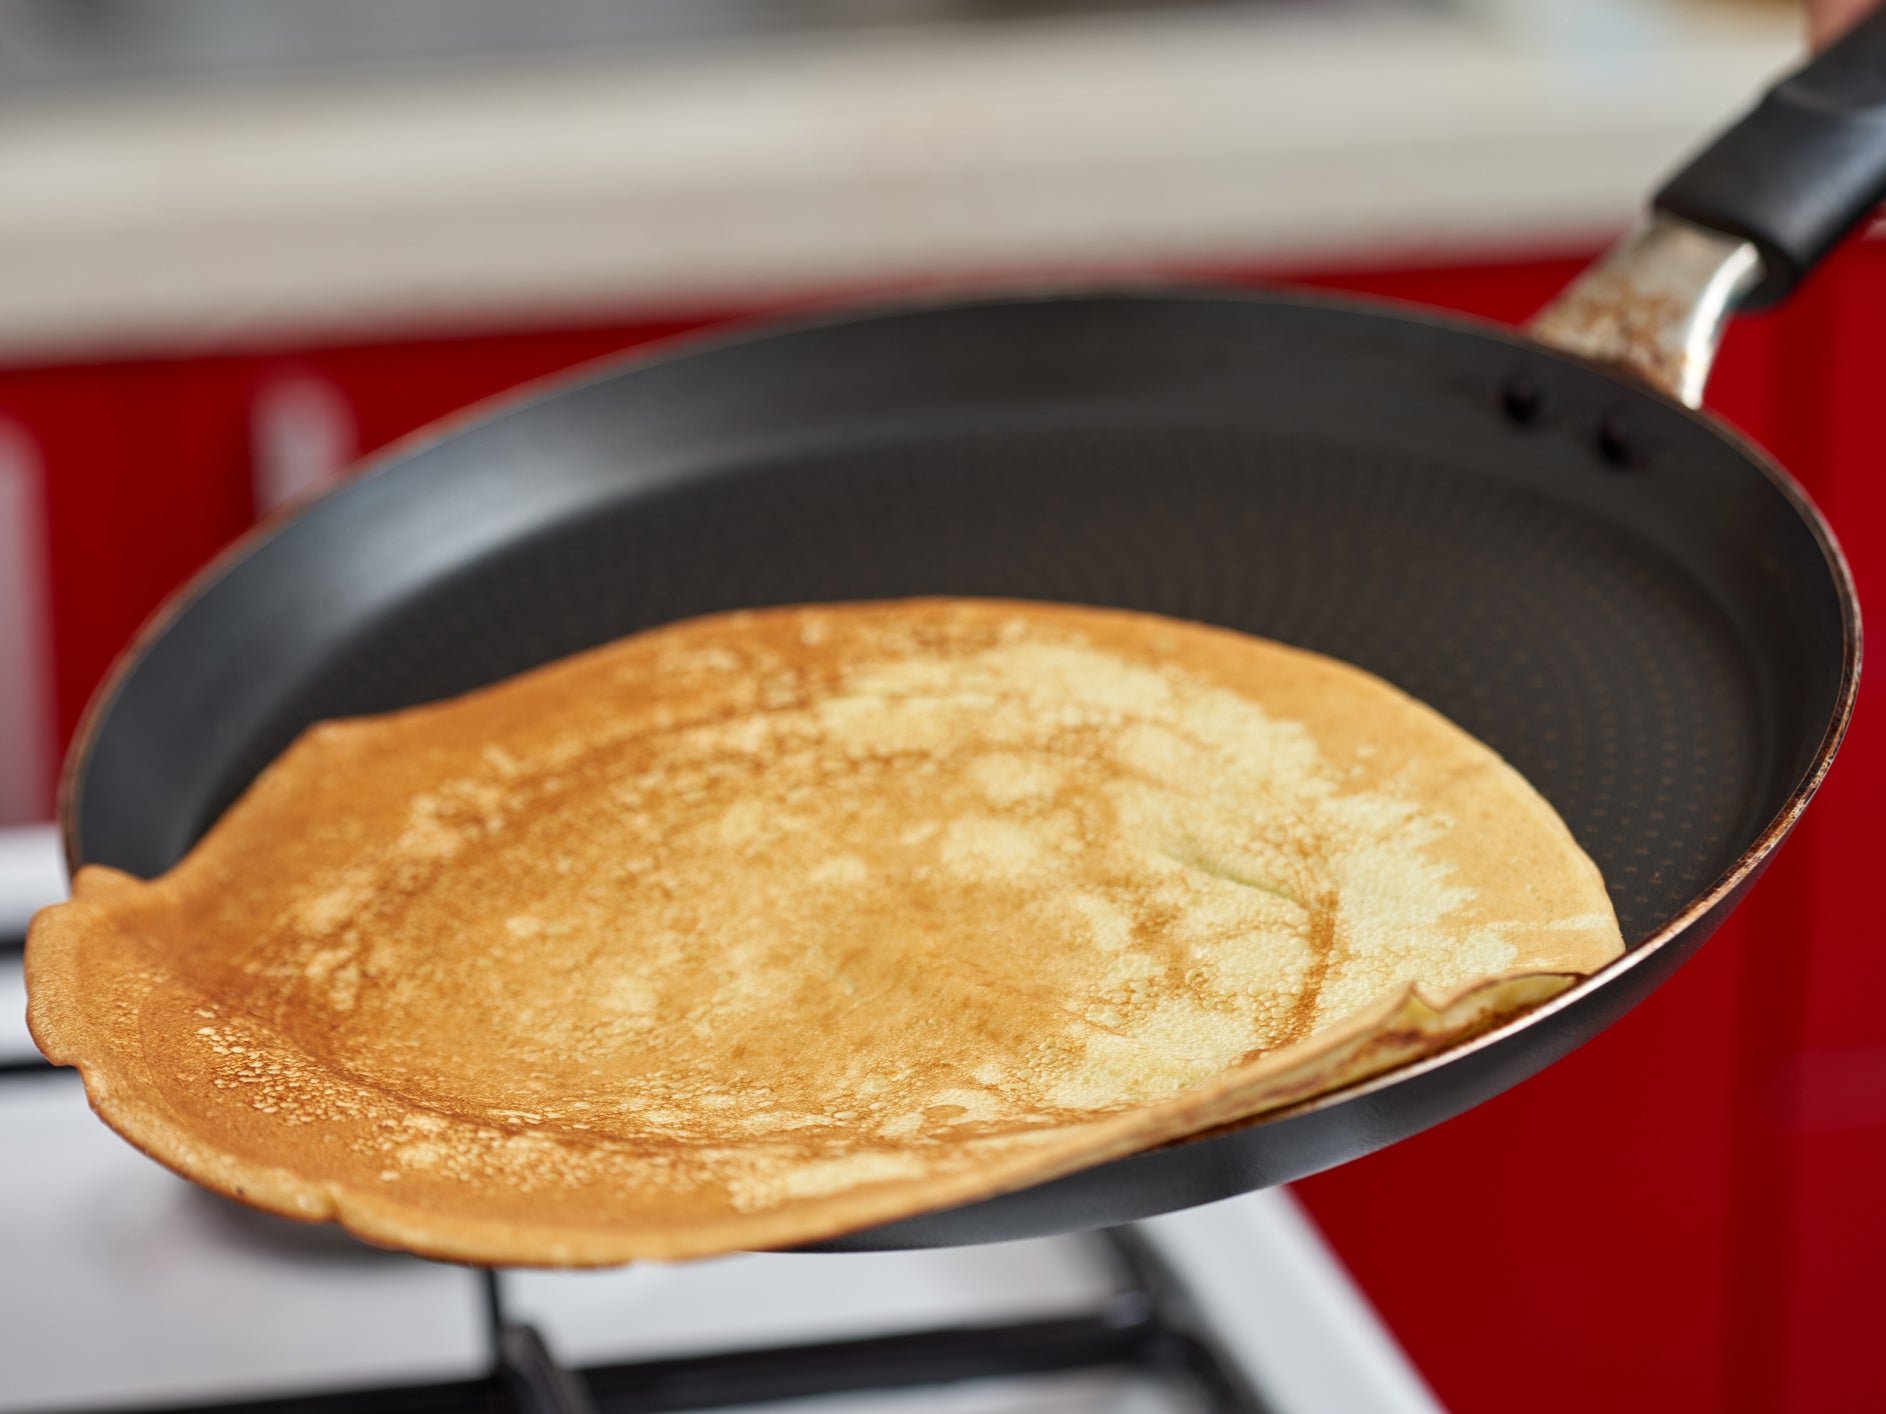 A pancake being flipped on Shrove Tuesday - the day before Valentine’s Day